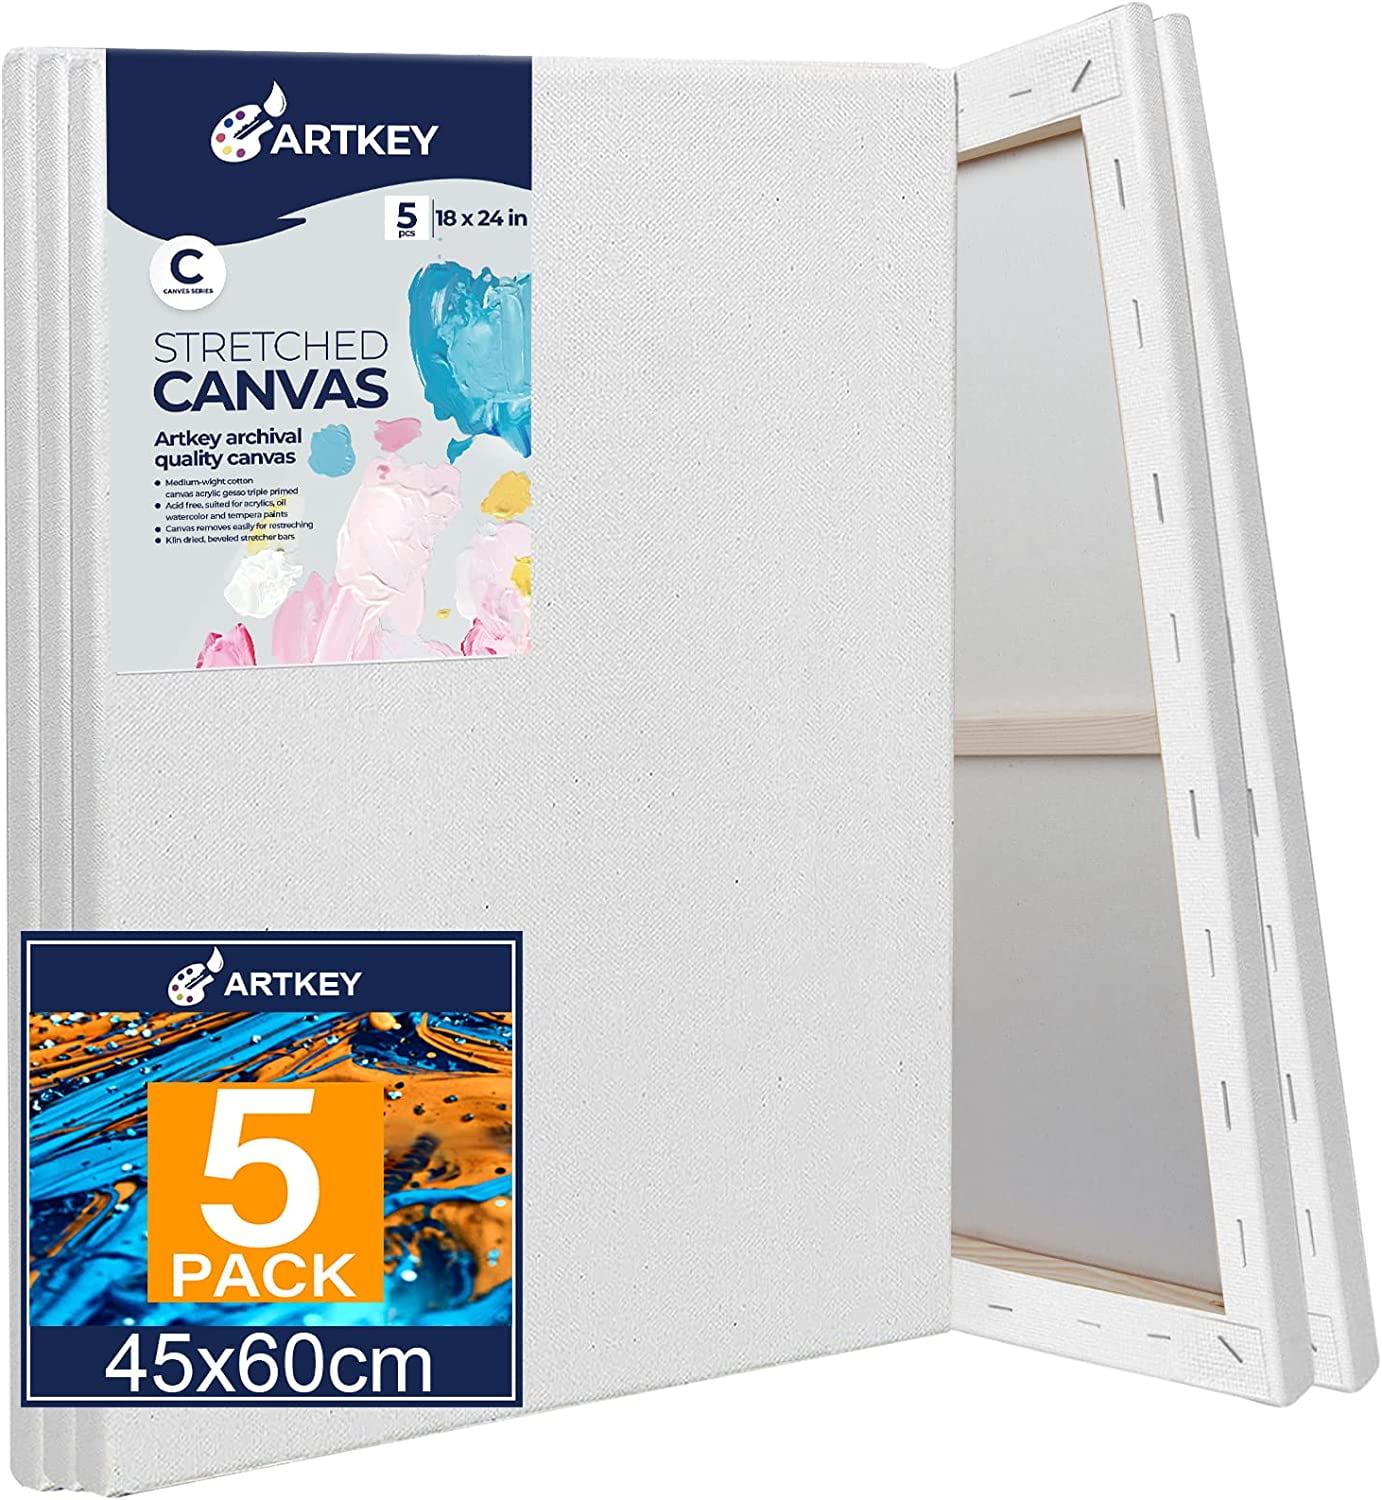 20 Pack Blank Canvas Panels - 5x7, 8x10, 9x12, 11x14 inch (5 Each) - 100%  Cotton, Primed, Acid Free